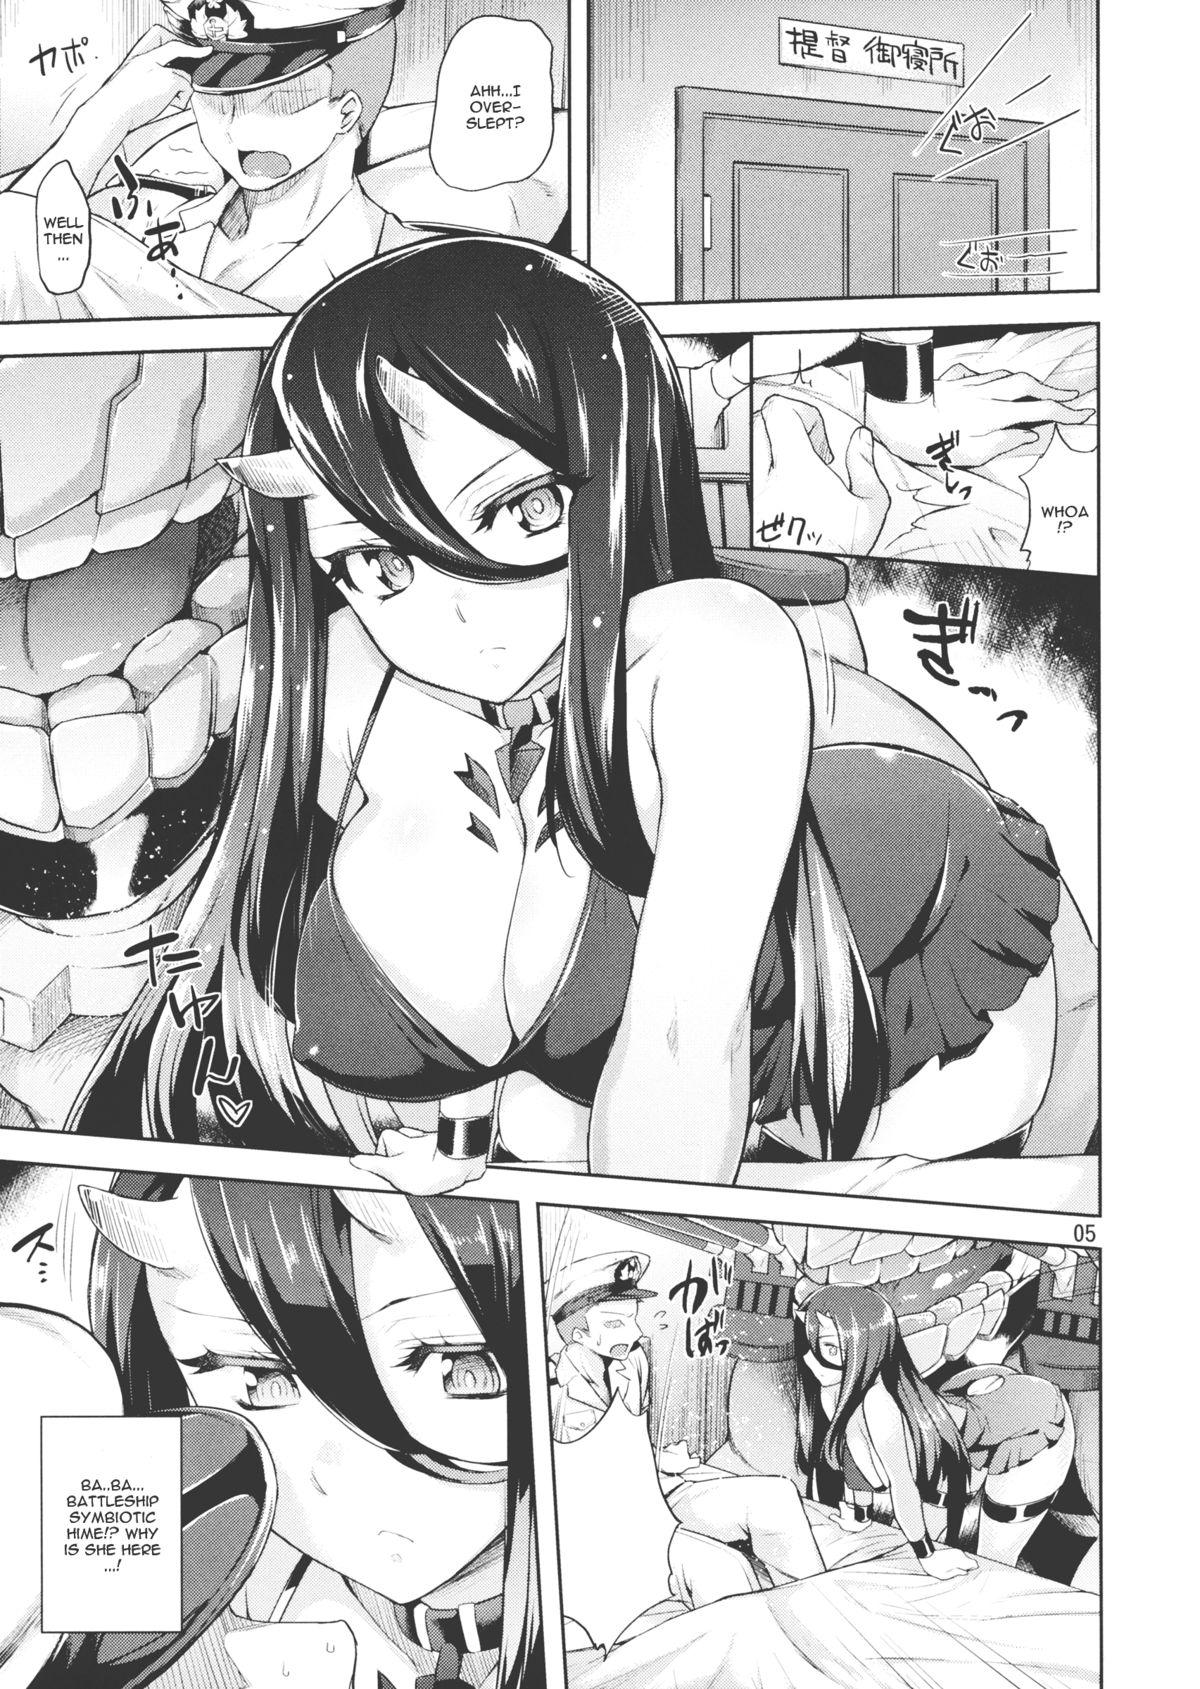 Class Room Amicable Unseen Entity - Kantai collection Nasty Porn - Page 4